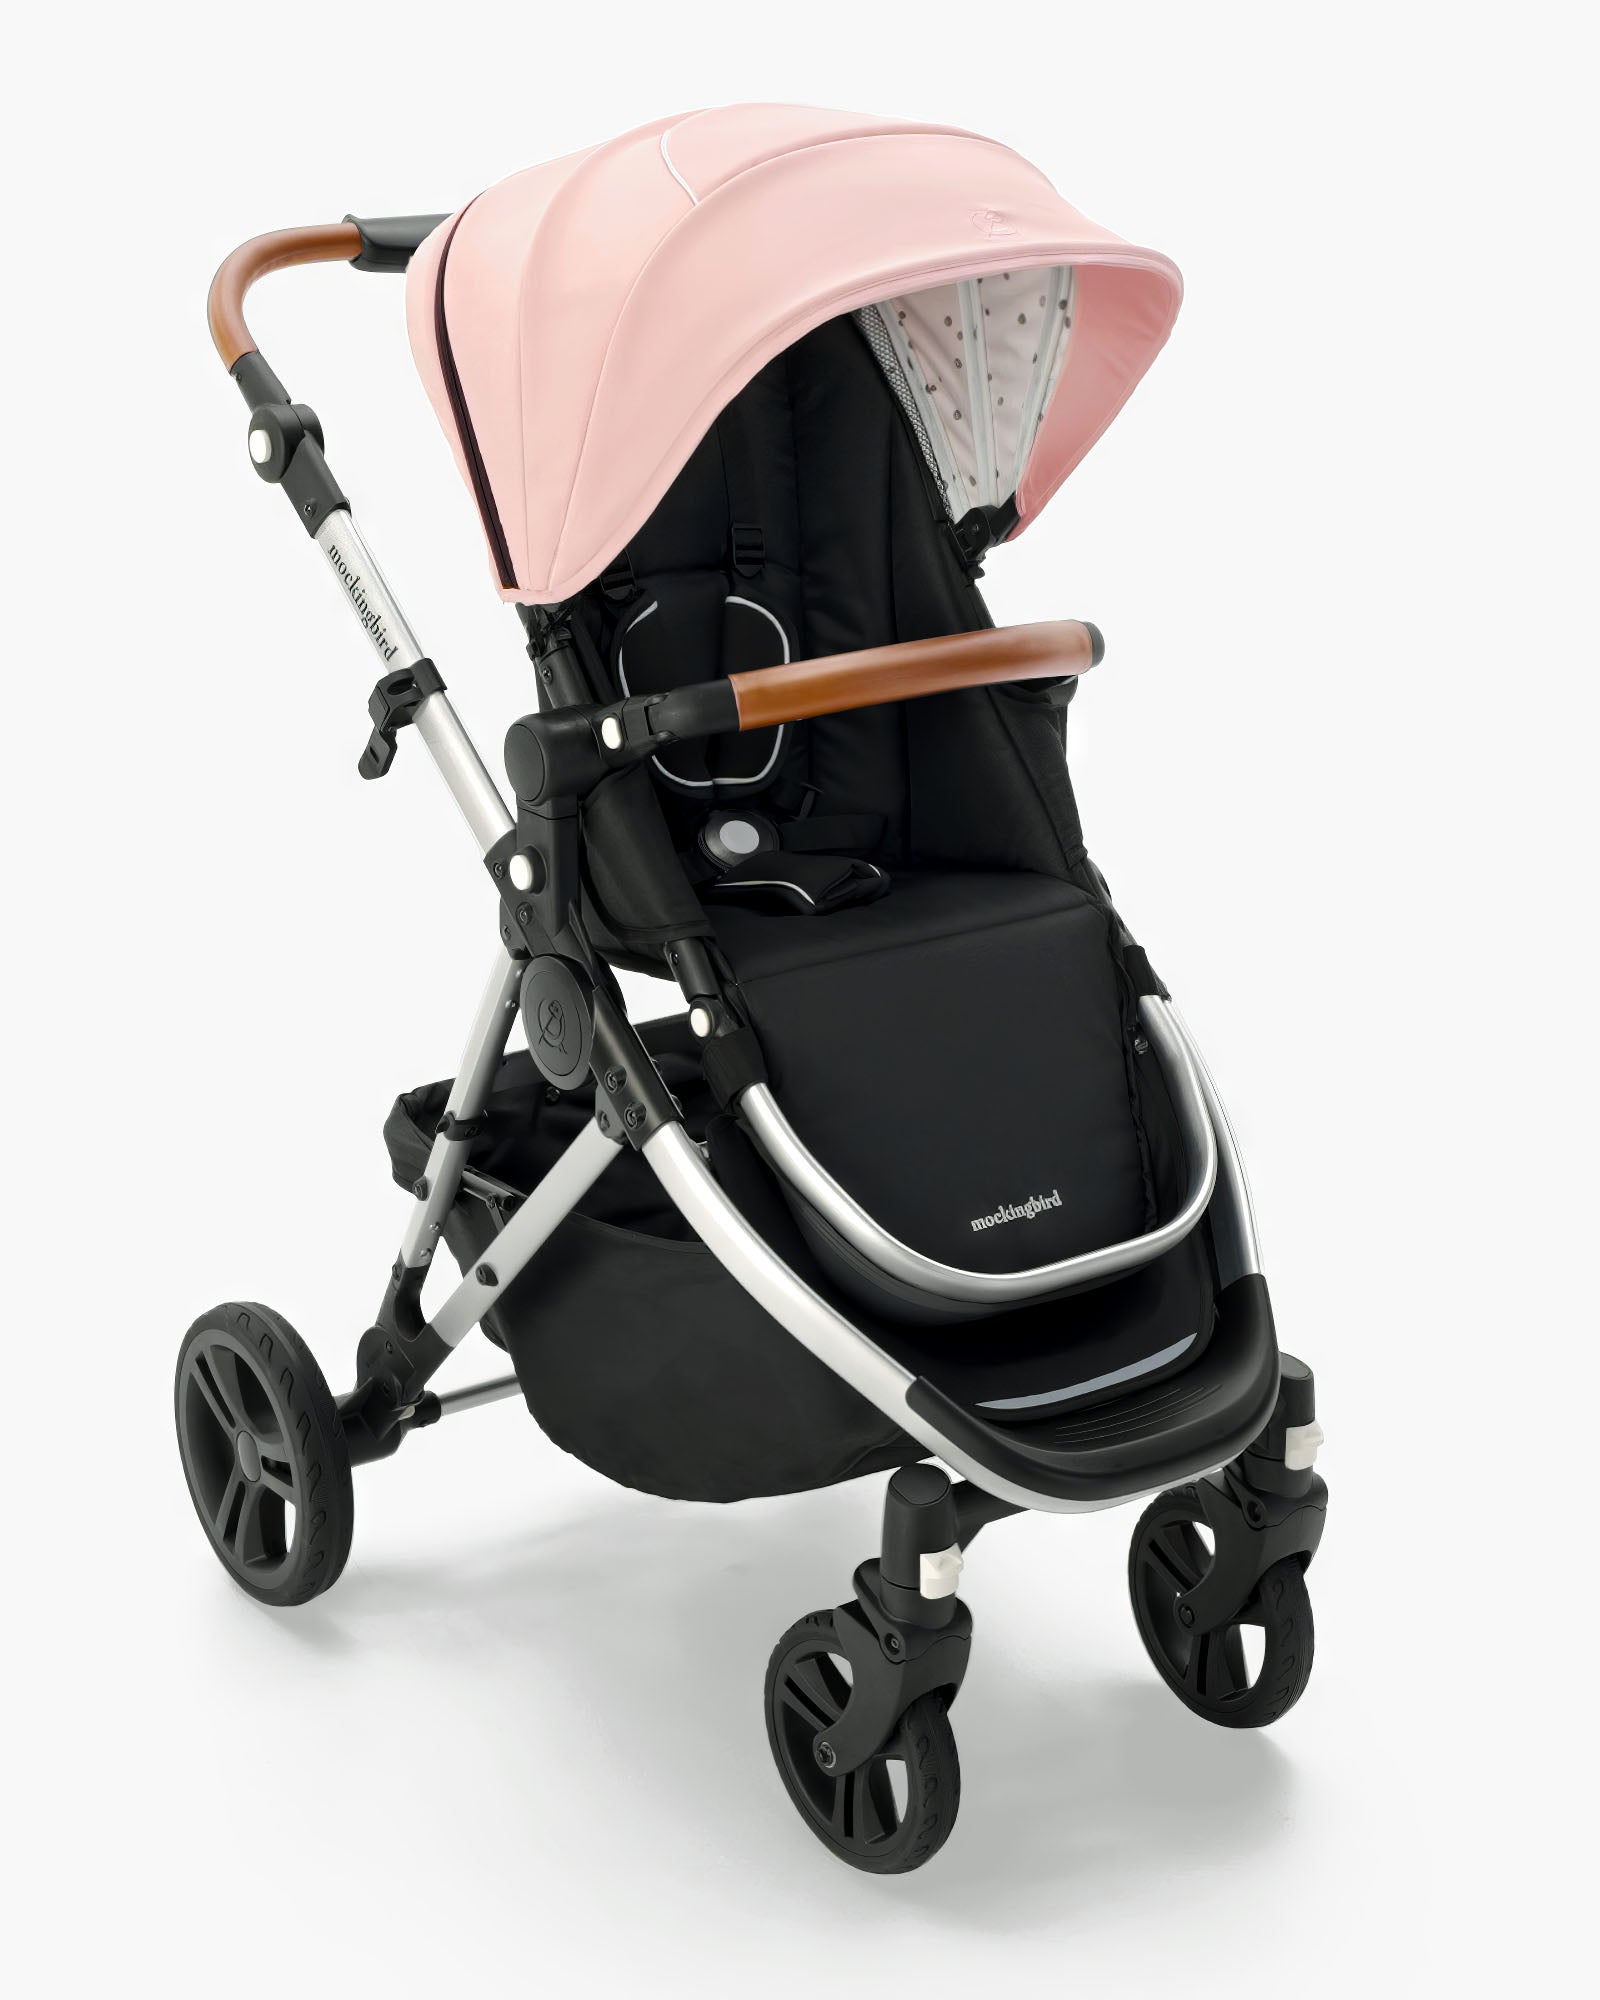 Modern Mockingbird Single Stroller 2.0 with a pink canopy and black seat from mockingbird, displayed against a white background. #color_bloom